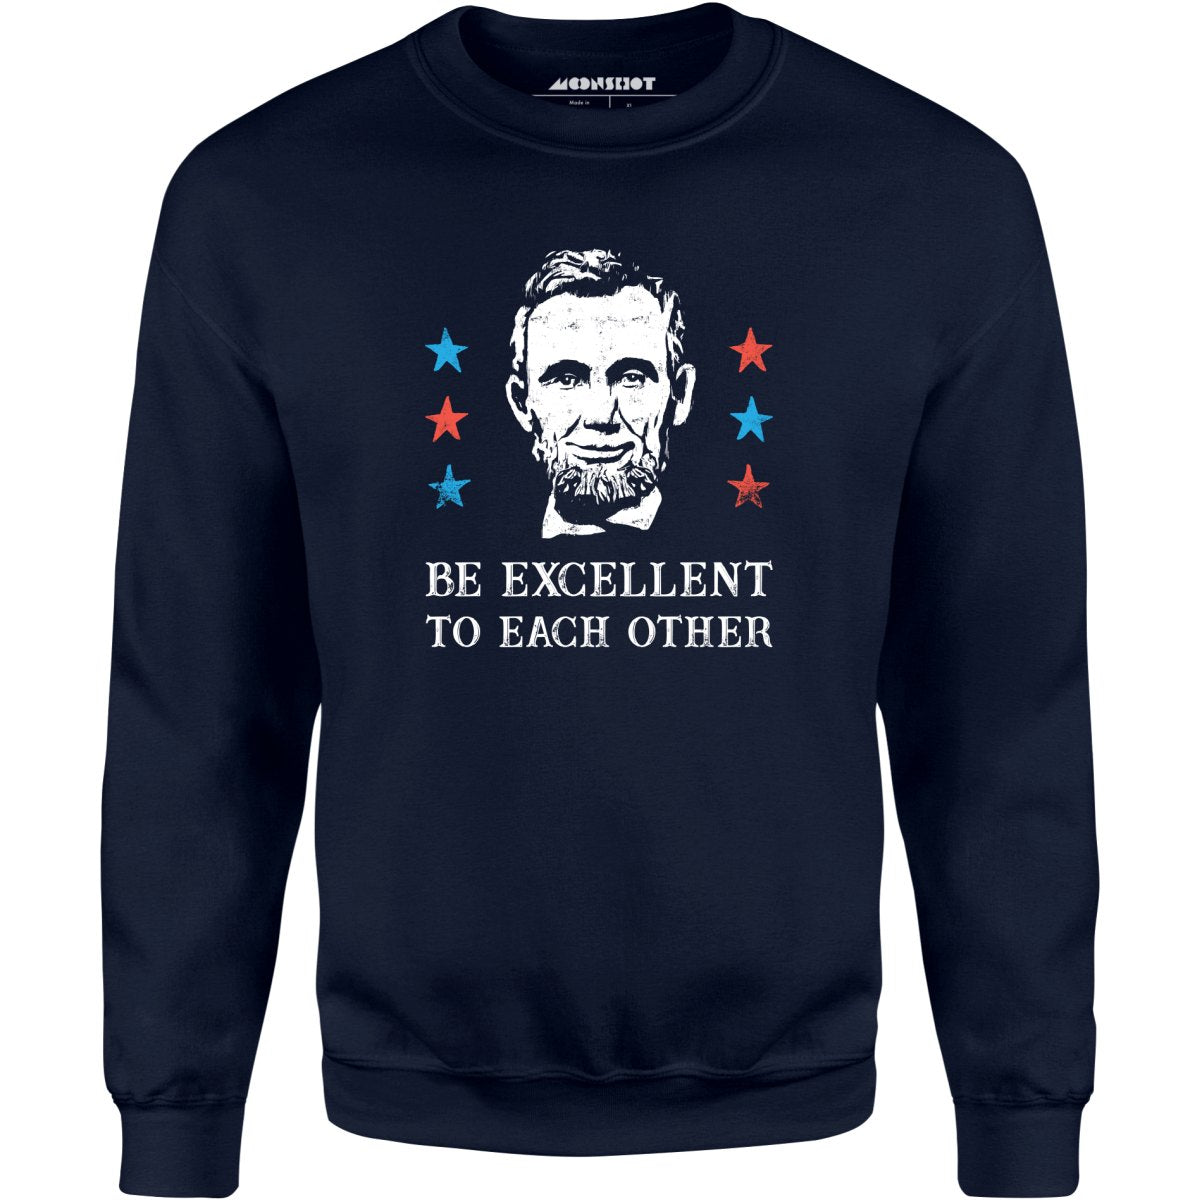 Be Excellent To Each Other - Unisex Sweatshirt